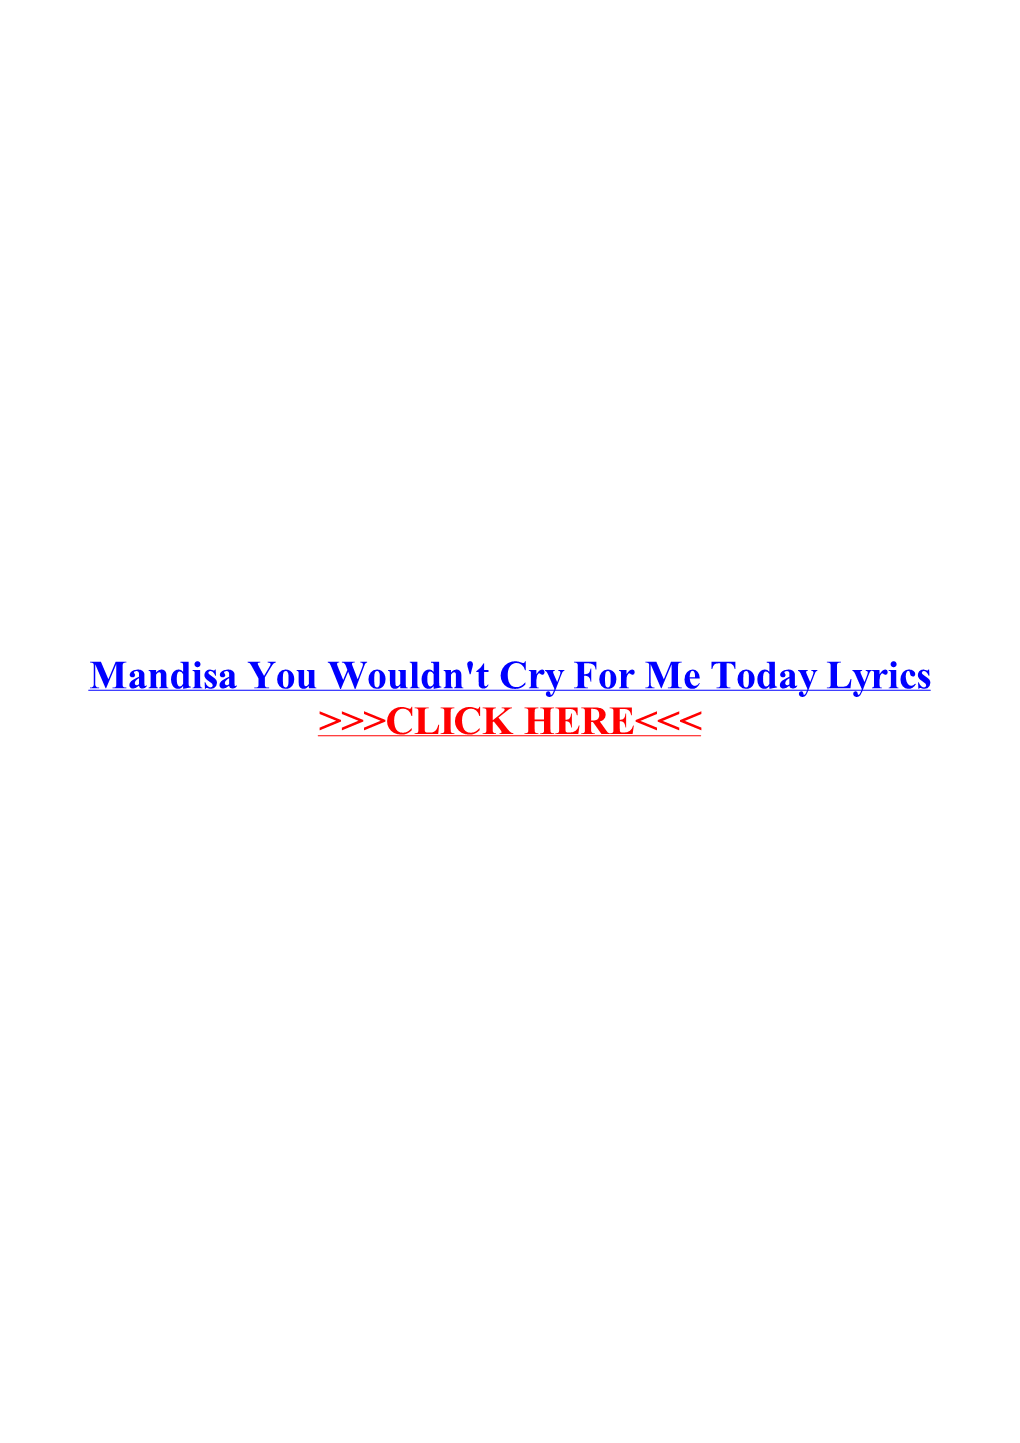 Mandisa You Wouldn't Cry for Me Today Lyrics